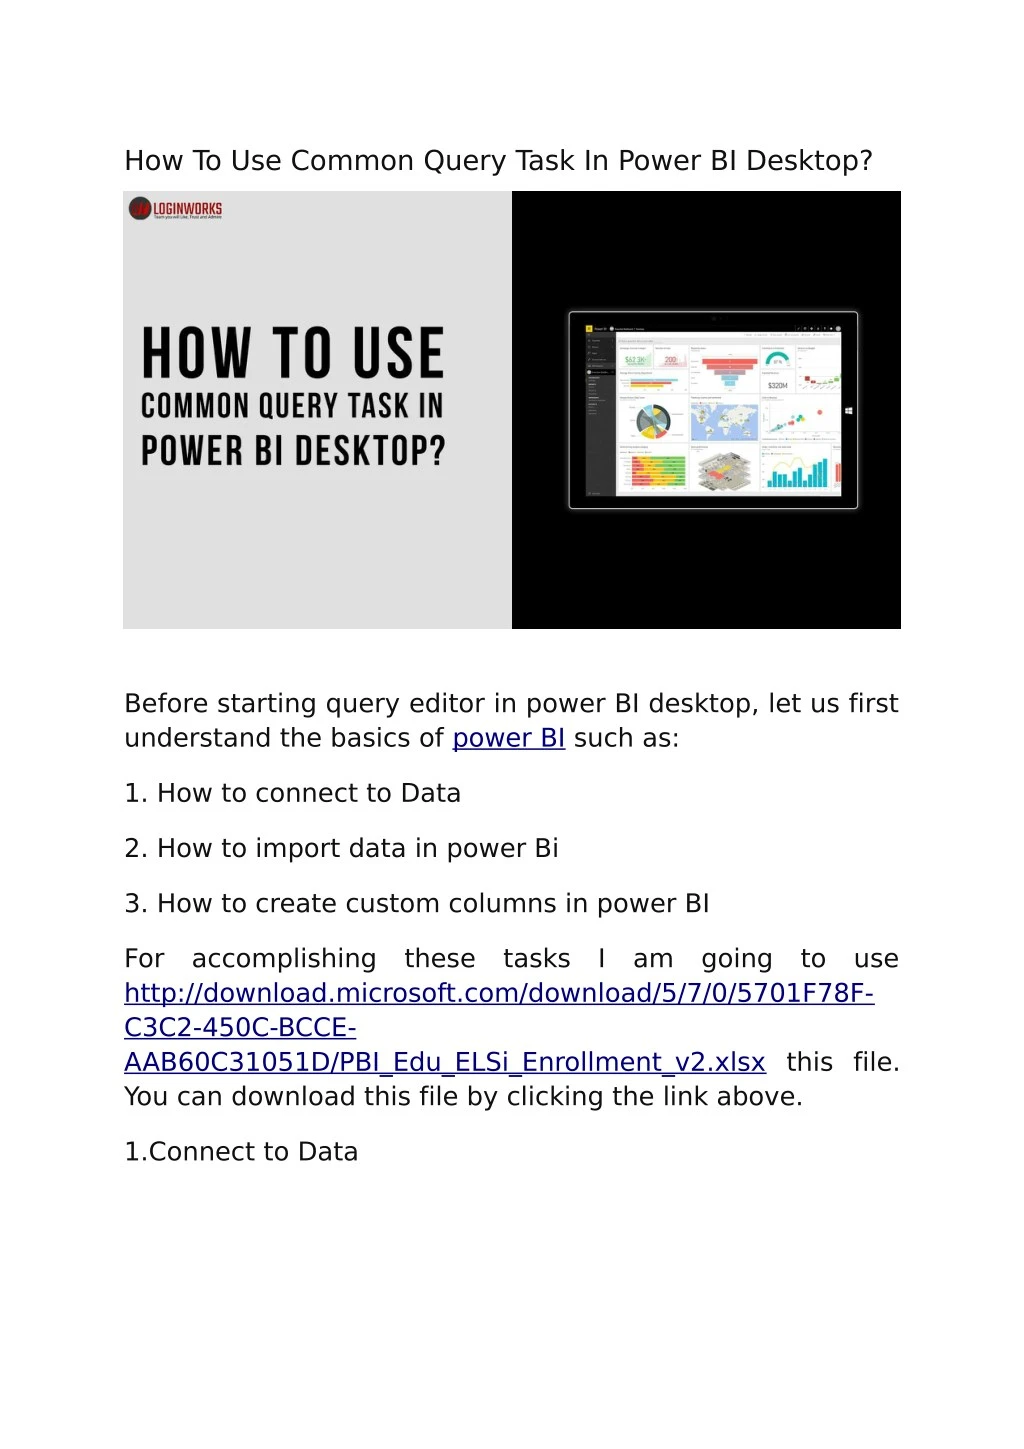 how to use common query task in power bi desktop